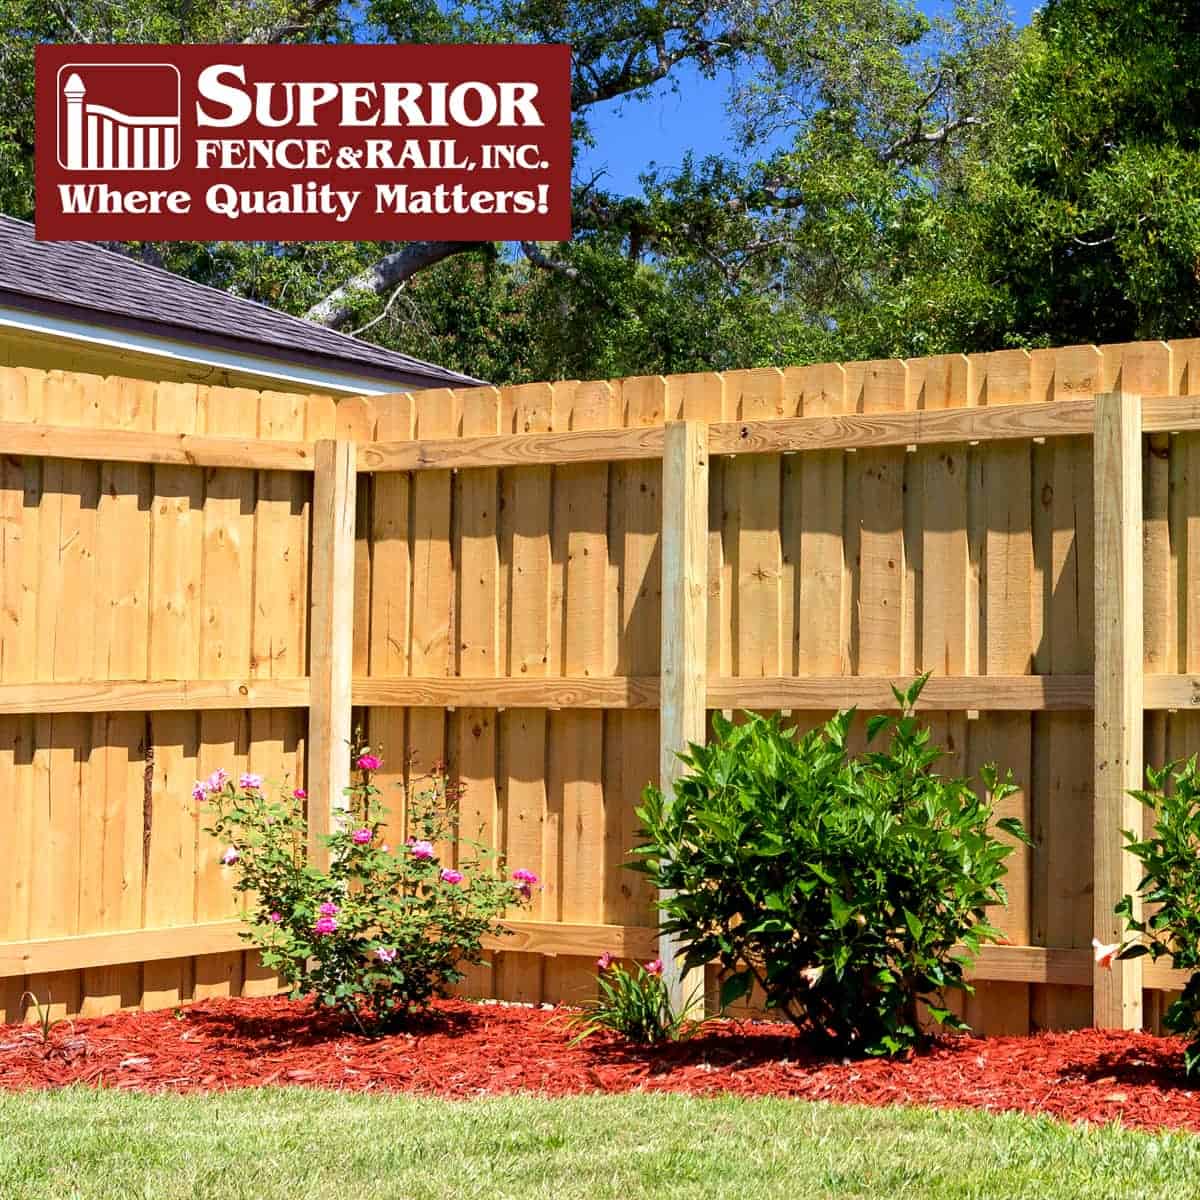 Roseville fence company contractor